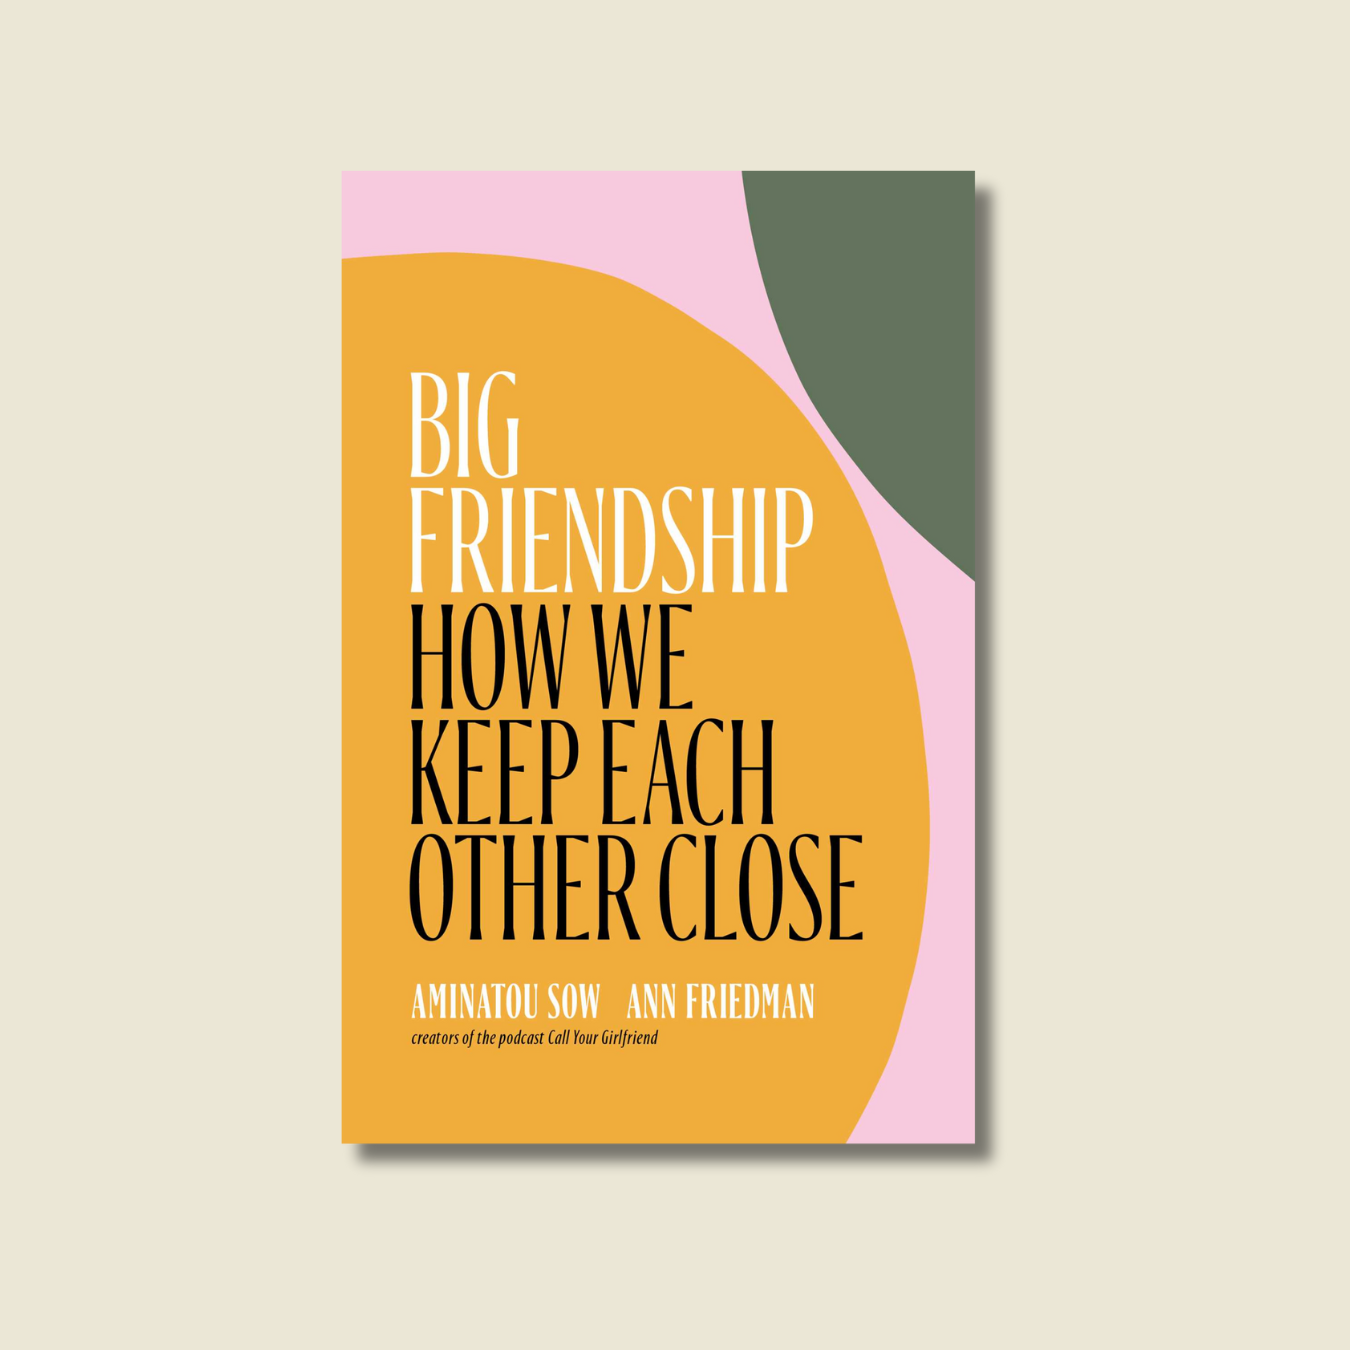 BIG FRIENDSHIP: HOW WE KEEP EACH OTHER CLOSE BY AMINATOU SOW AND ANN FRIEDMAN